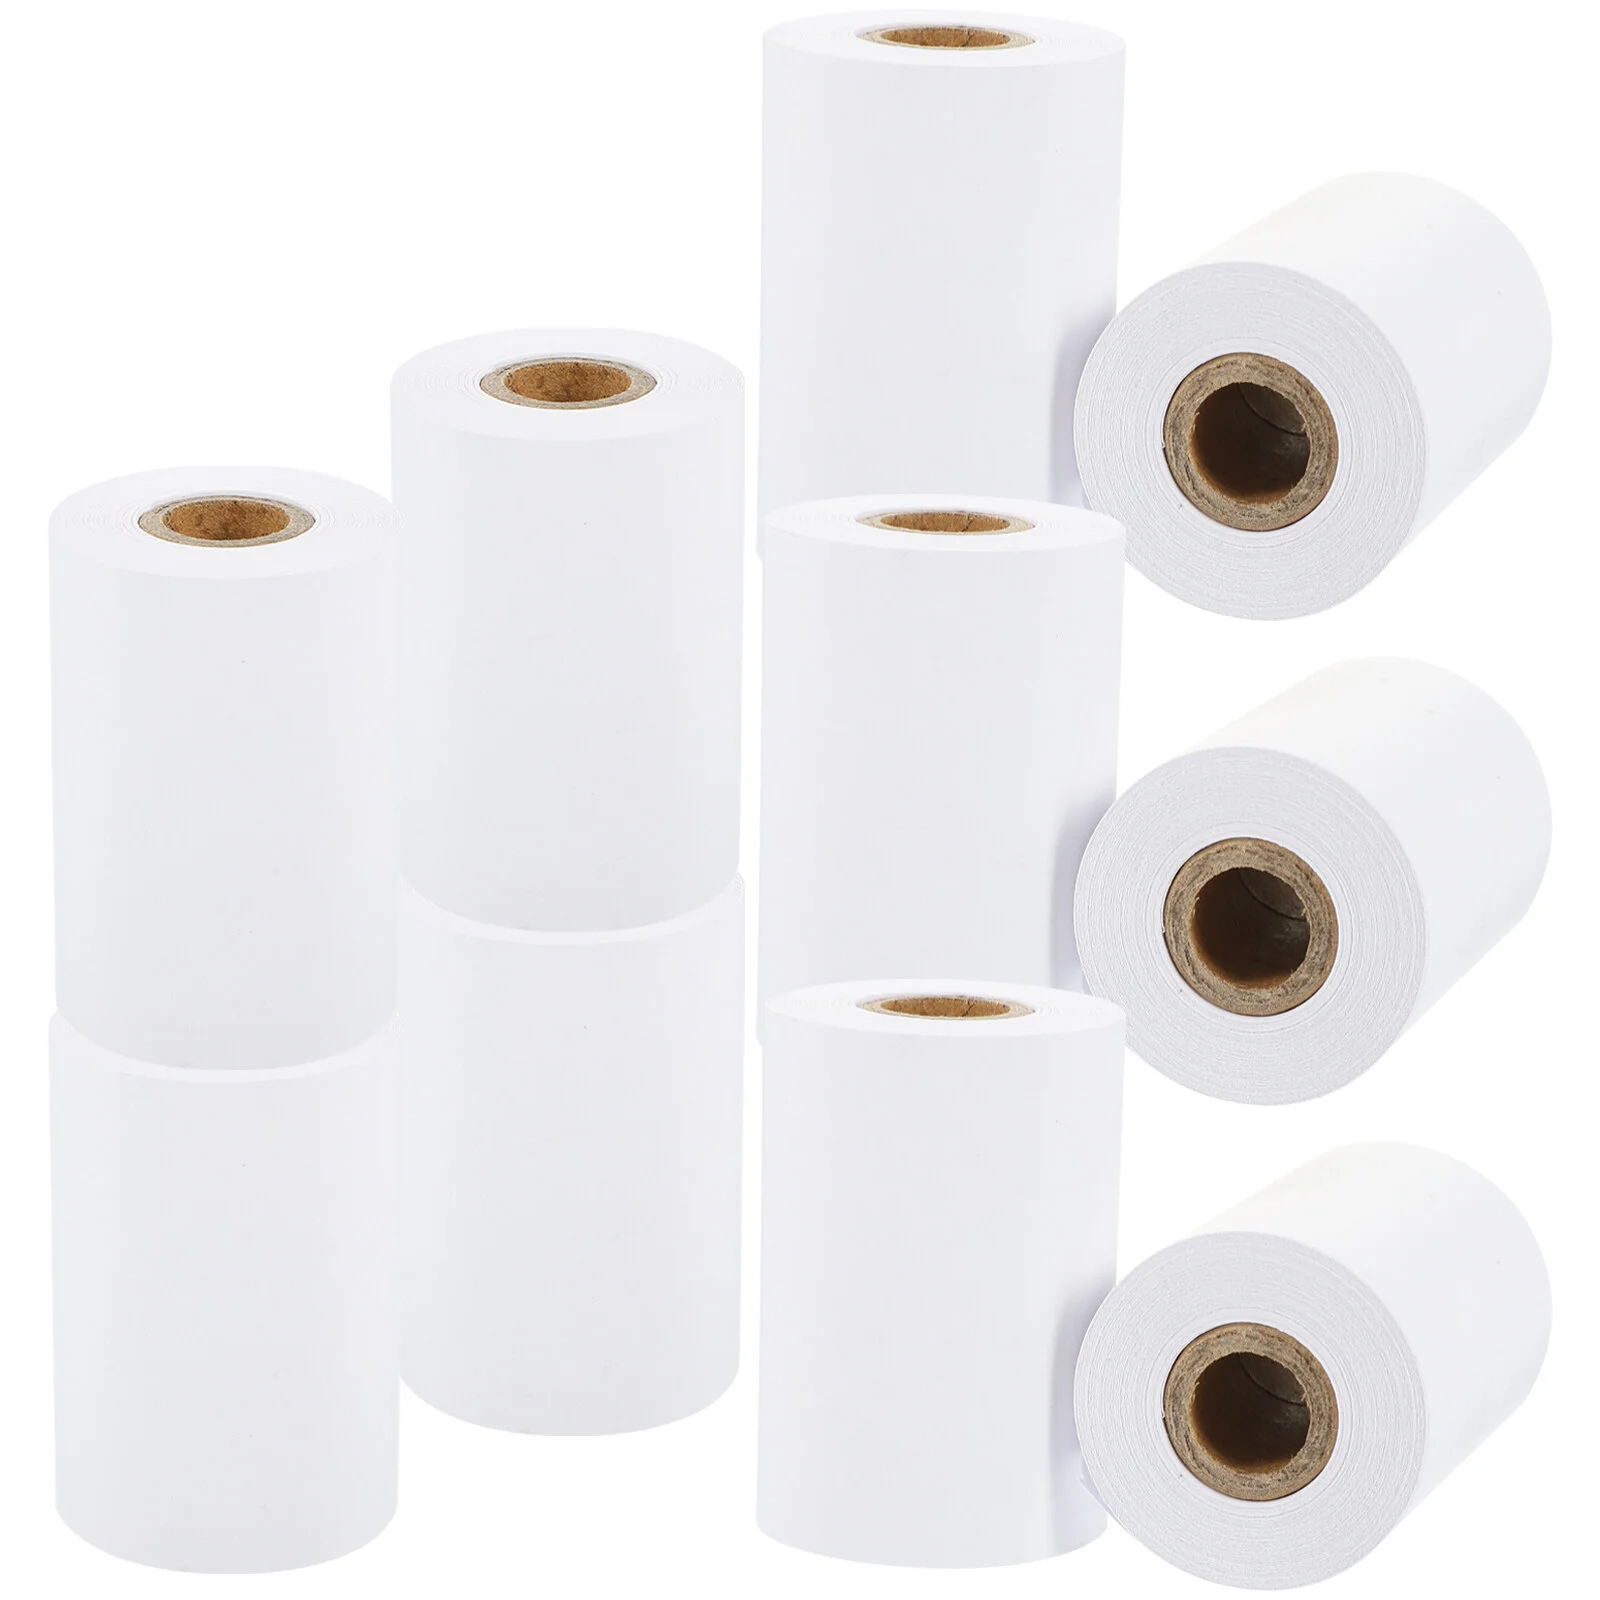 

10 Rolls Receipt Paper Thermal Papers Cash Register Multifunction Cashier Multipurpose Printing Blank Labels